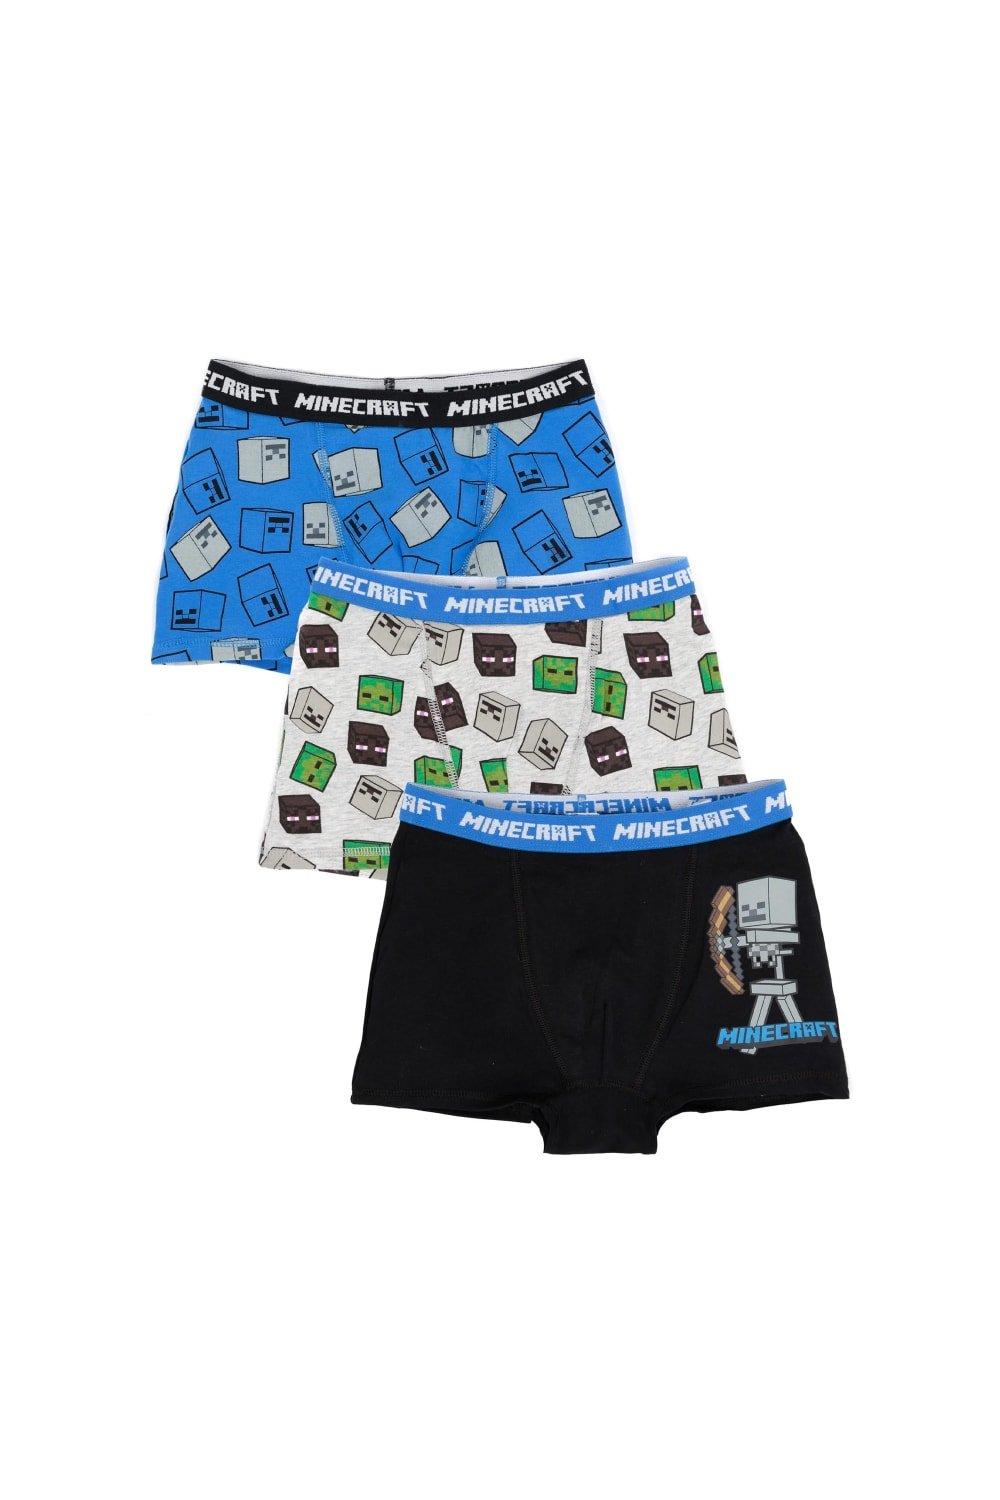 Buy Minecraft Trunks 3 Pack 11-12 years, Underwear and socks